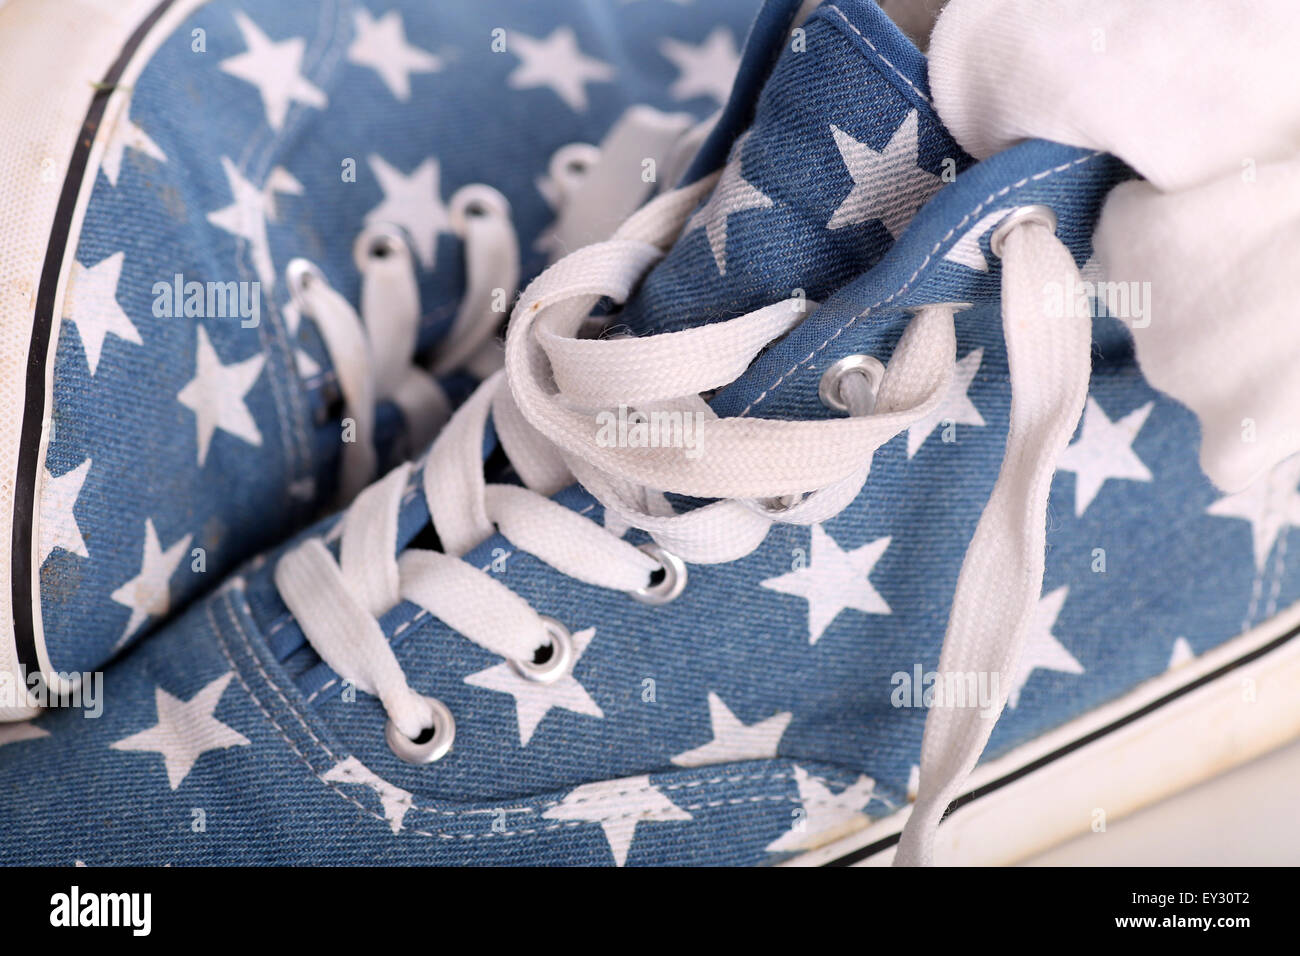 Fancy blue fake converse shoes or trainers with stars on them Stock Photo -  Alamy